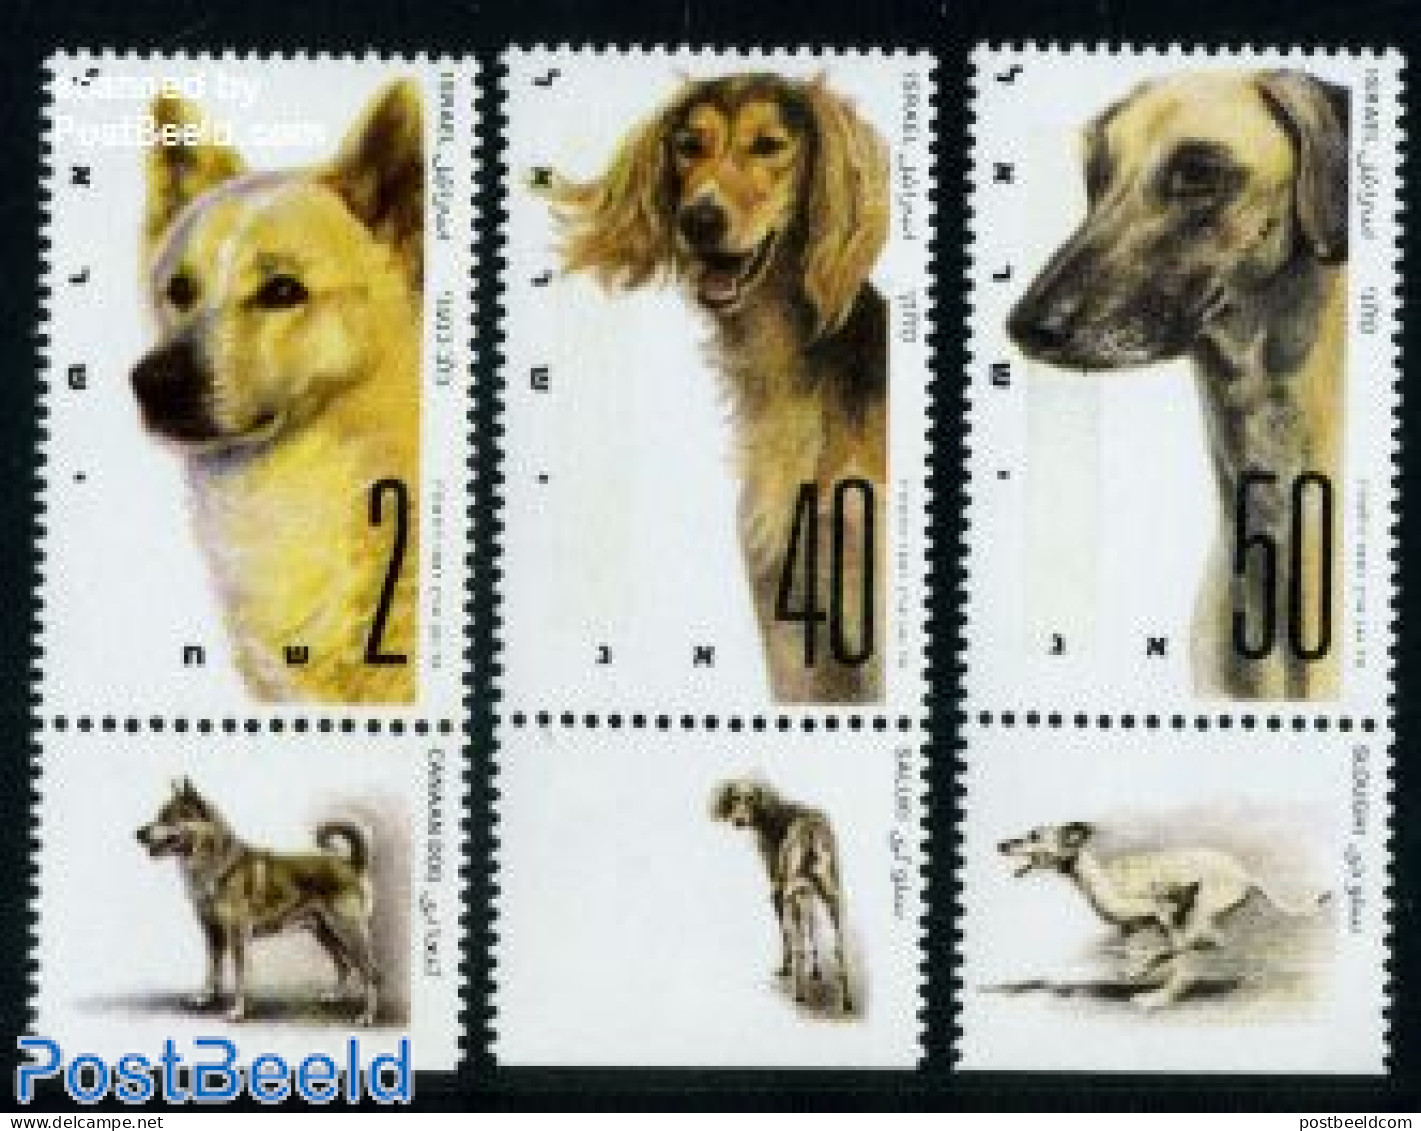 Israel 1987 Dog Exposition 3v, Mint NH, Nature - Dogs - Neufs (avec Tabs)